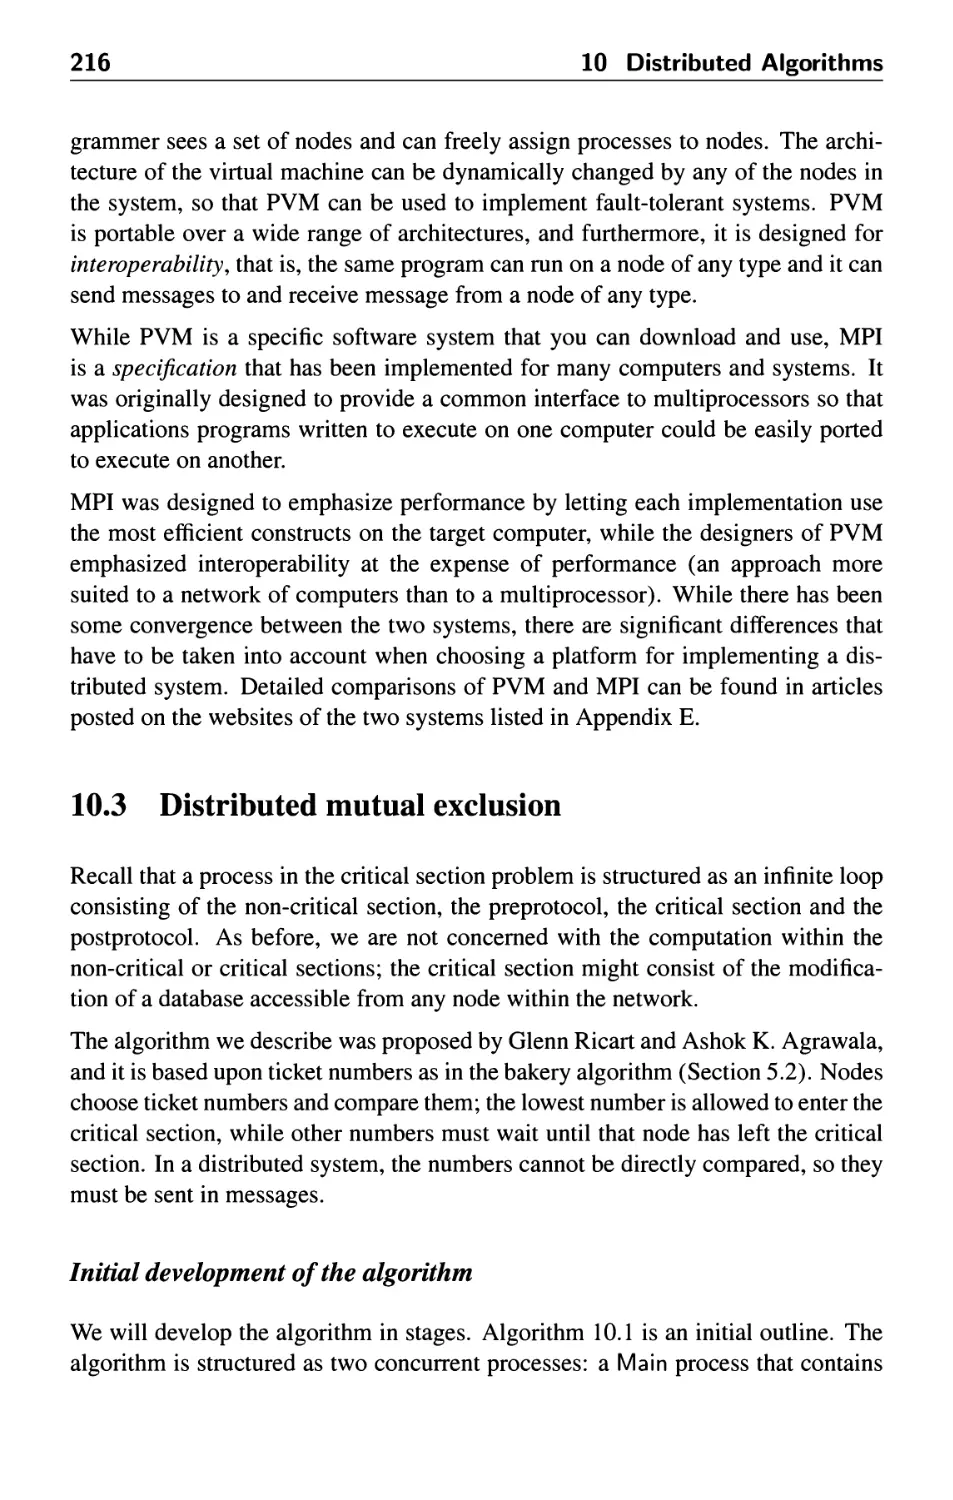 10.3 Distributed mutual exclusion